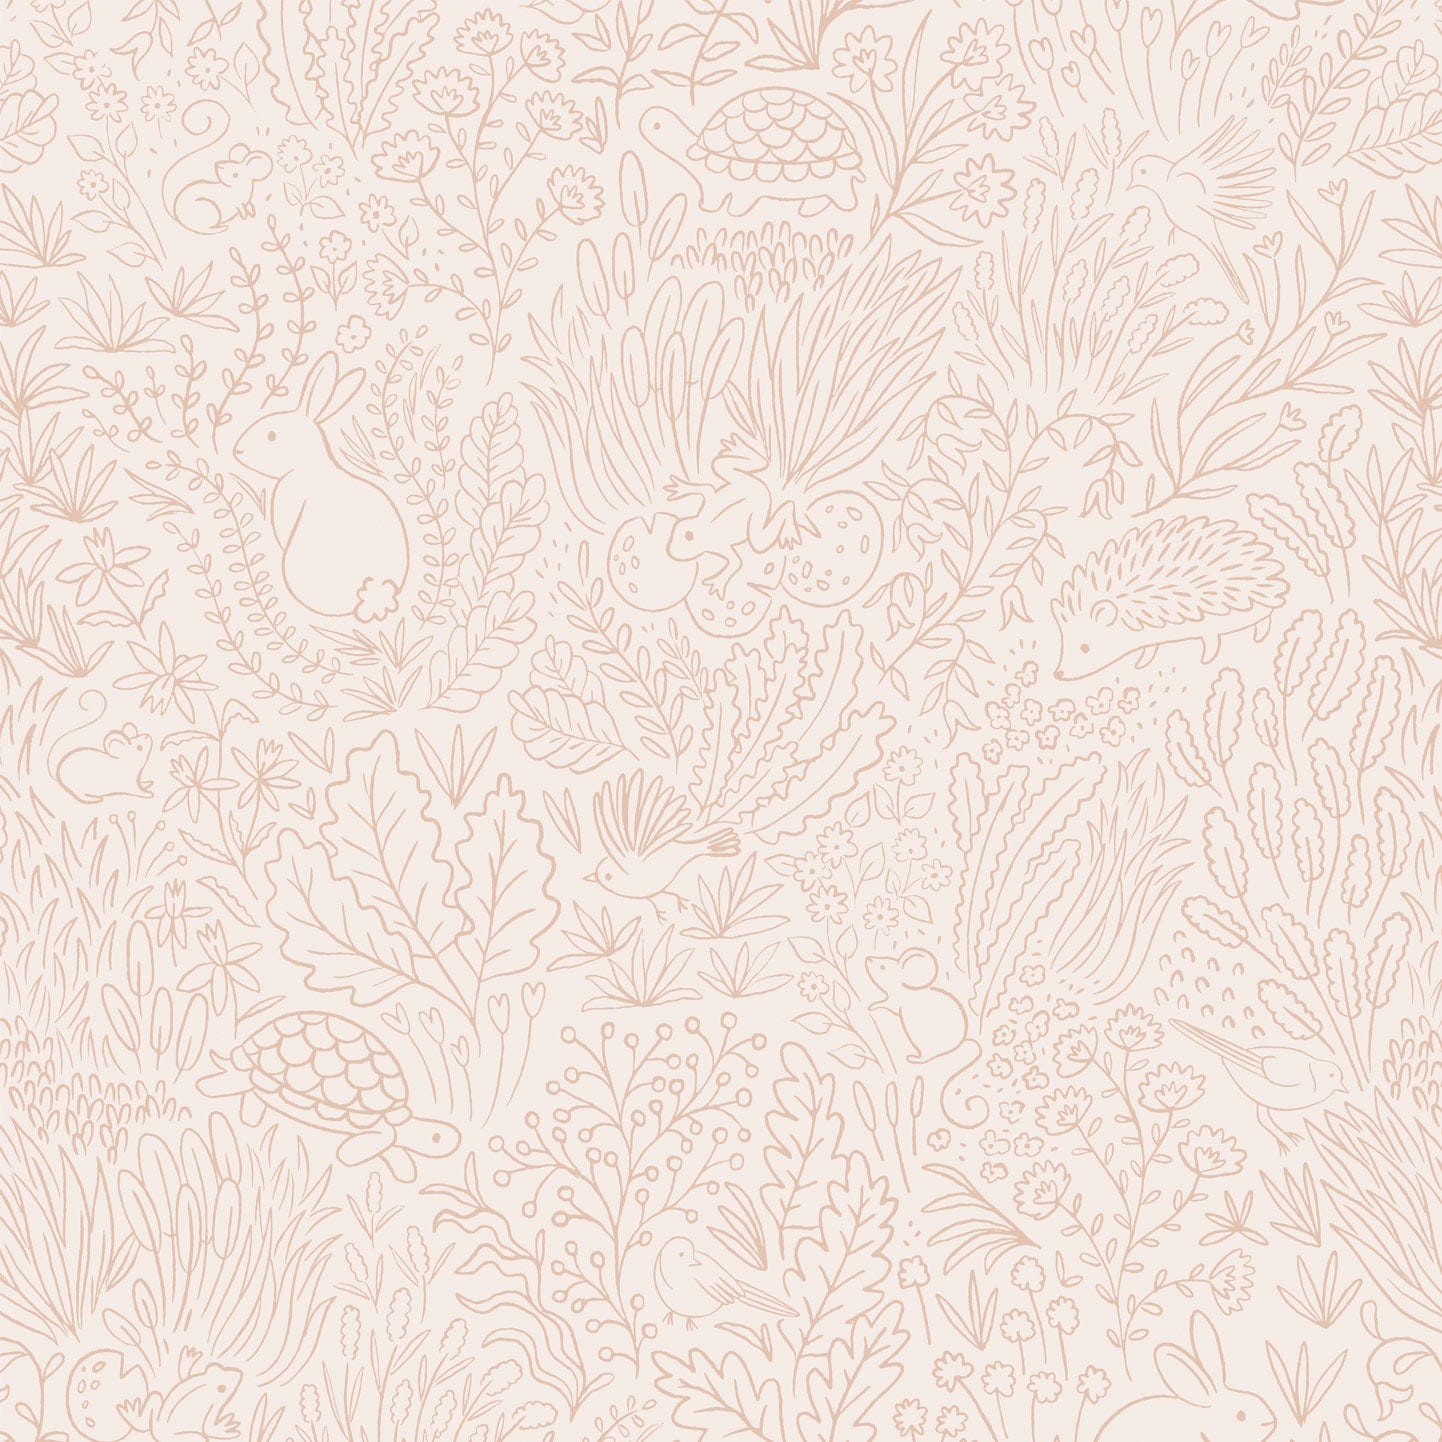 Wallpaper sample of Orange line work animals and florals such as rabbits, hedgehogs, frogs, tortoise, mice and birds. 